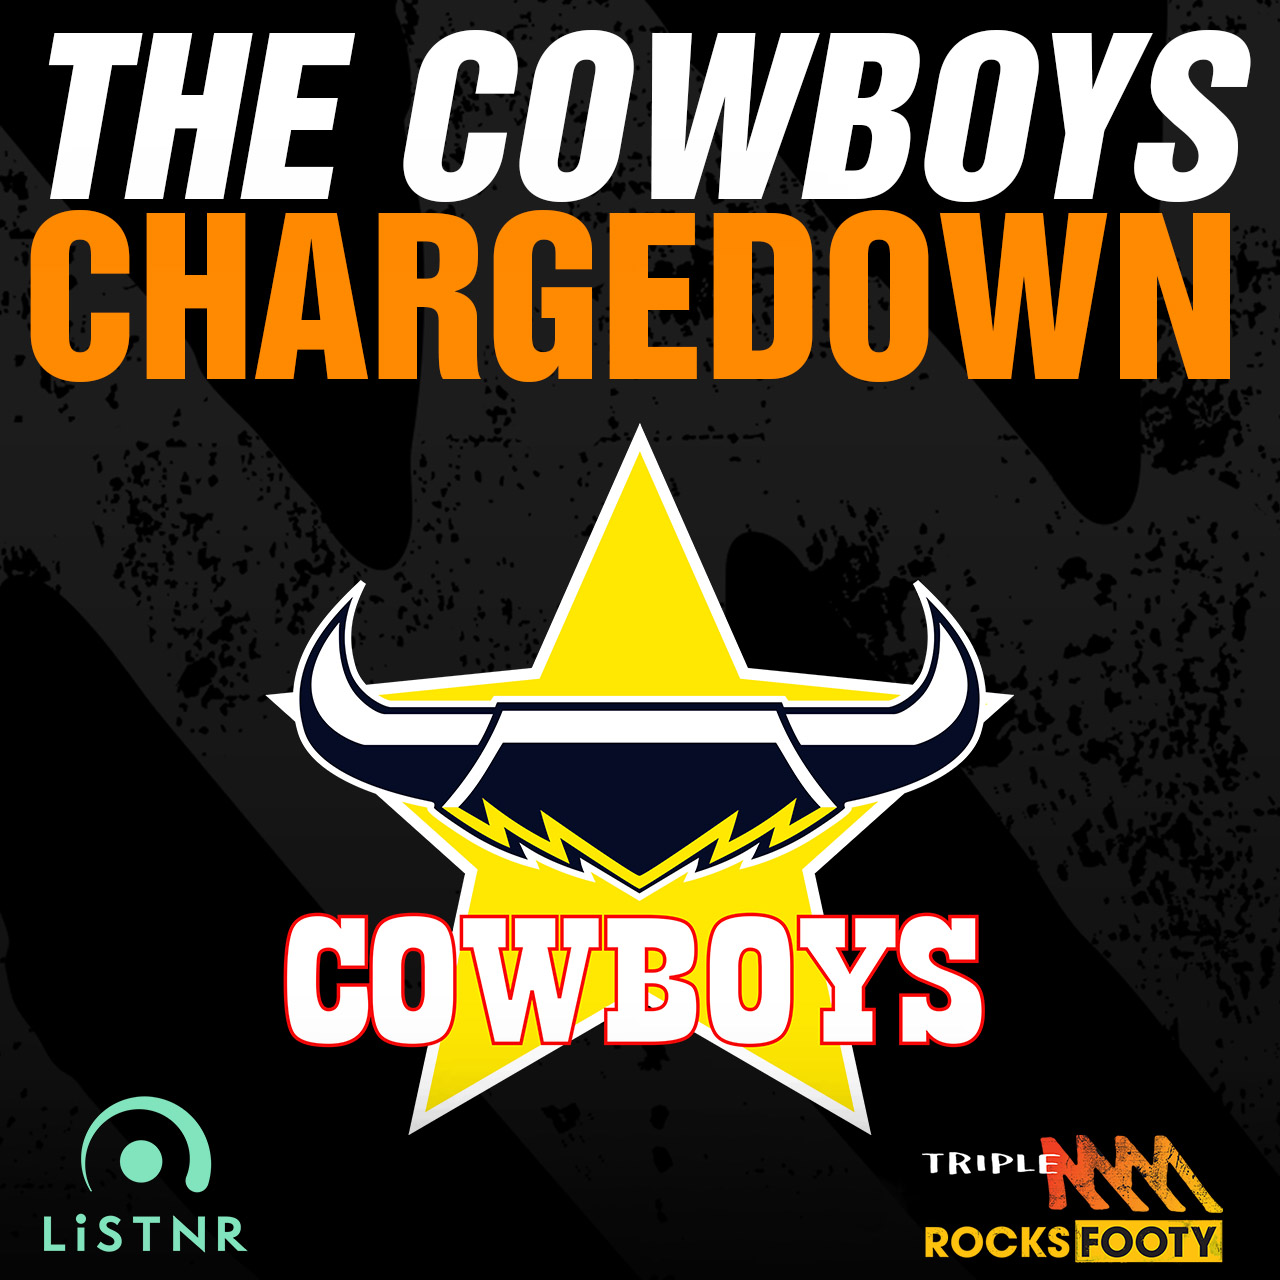 Cowboys Chargedown - What's Coops BIG scoop?